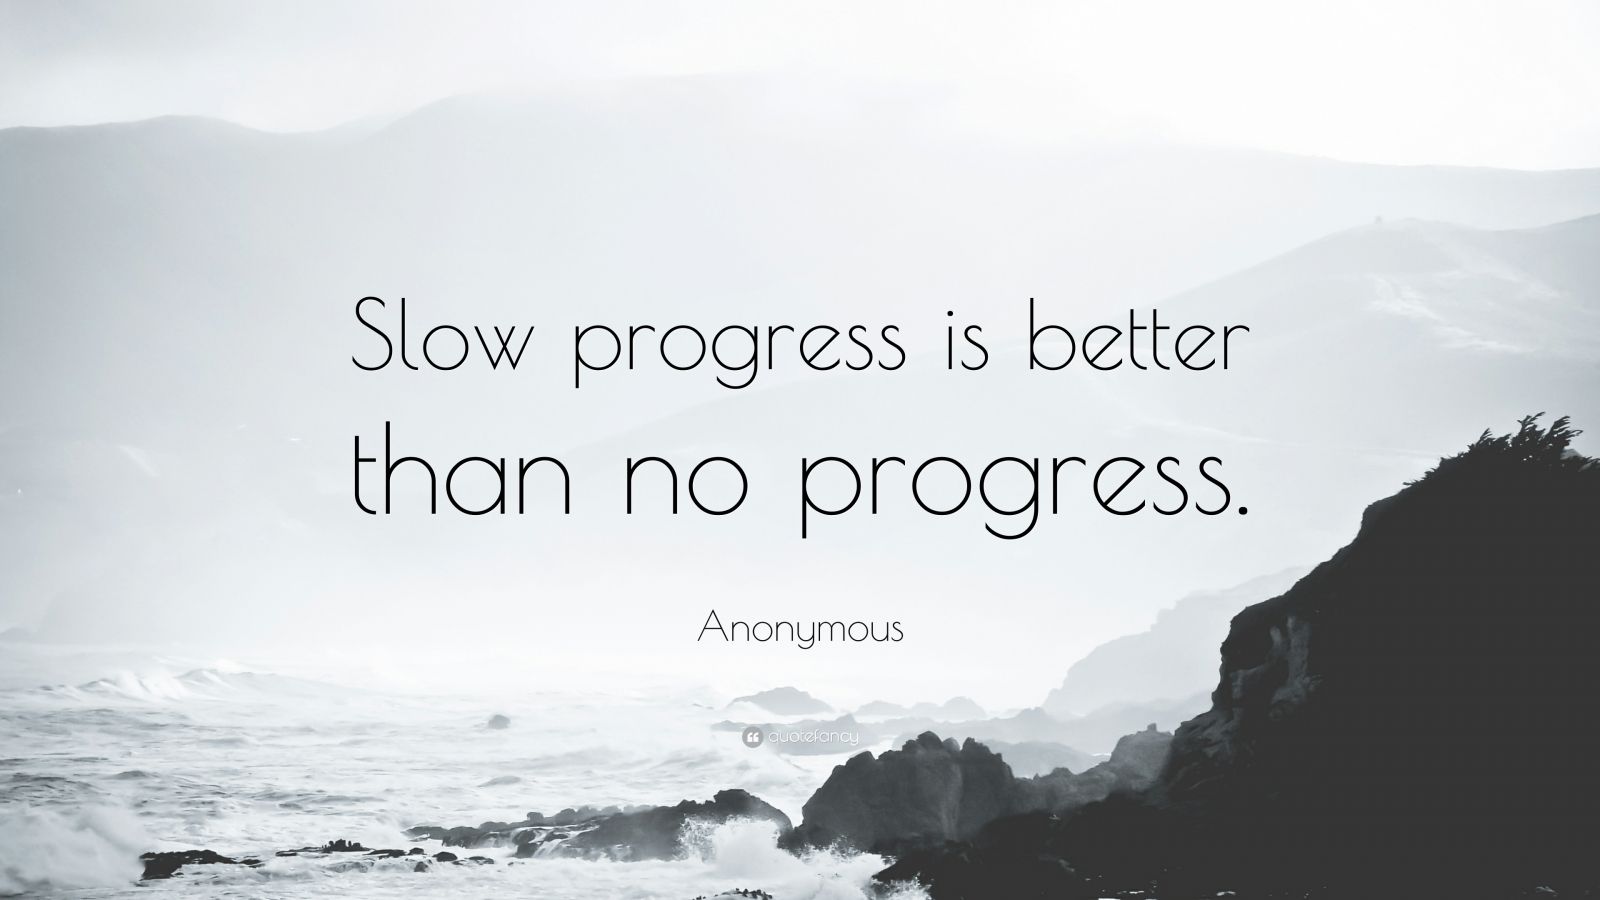 Anonymous Quote: “Slow progress is better than no progress.” (42